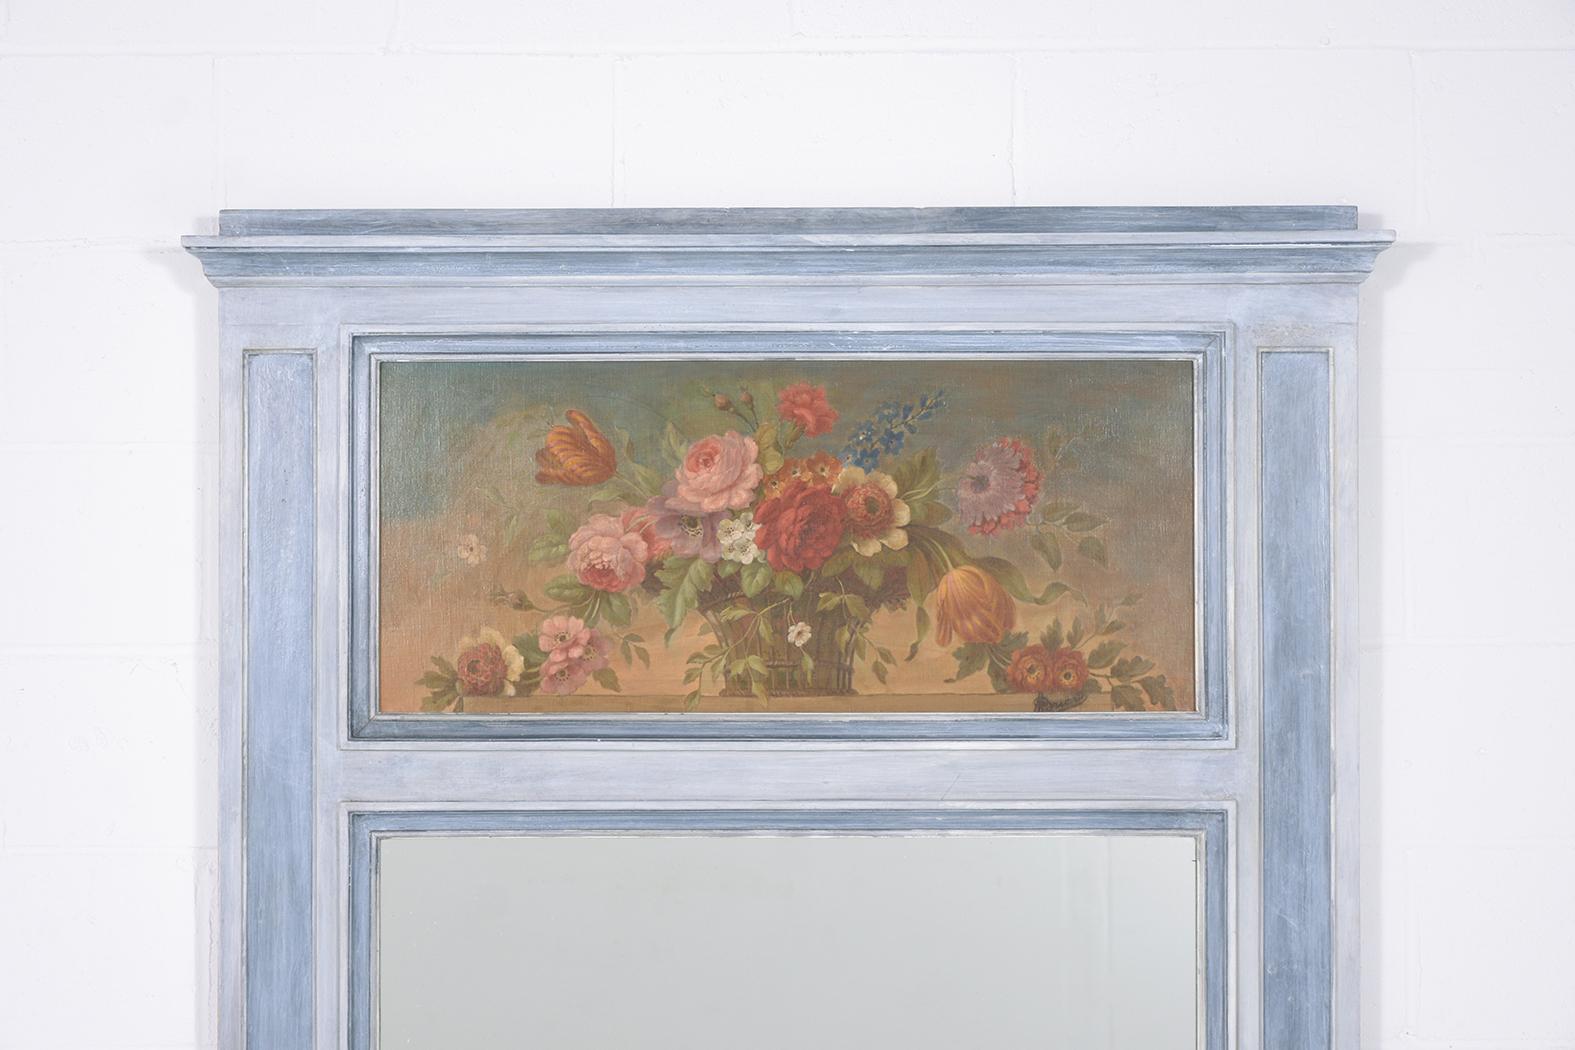 French Provincial Restored 1950s French Trumeau Mirror with Floral Painting - Vintage Elegance For Sale